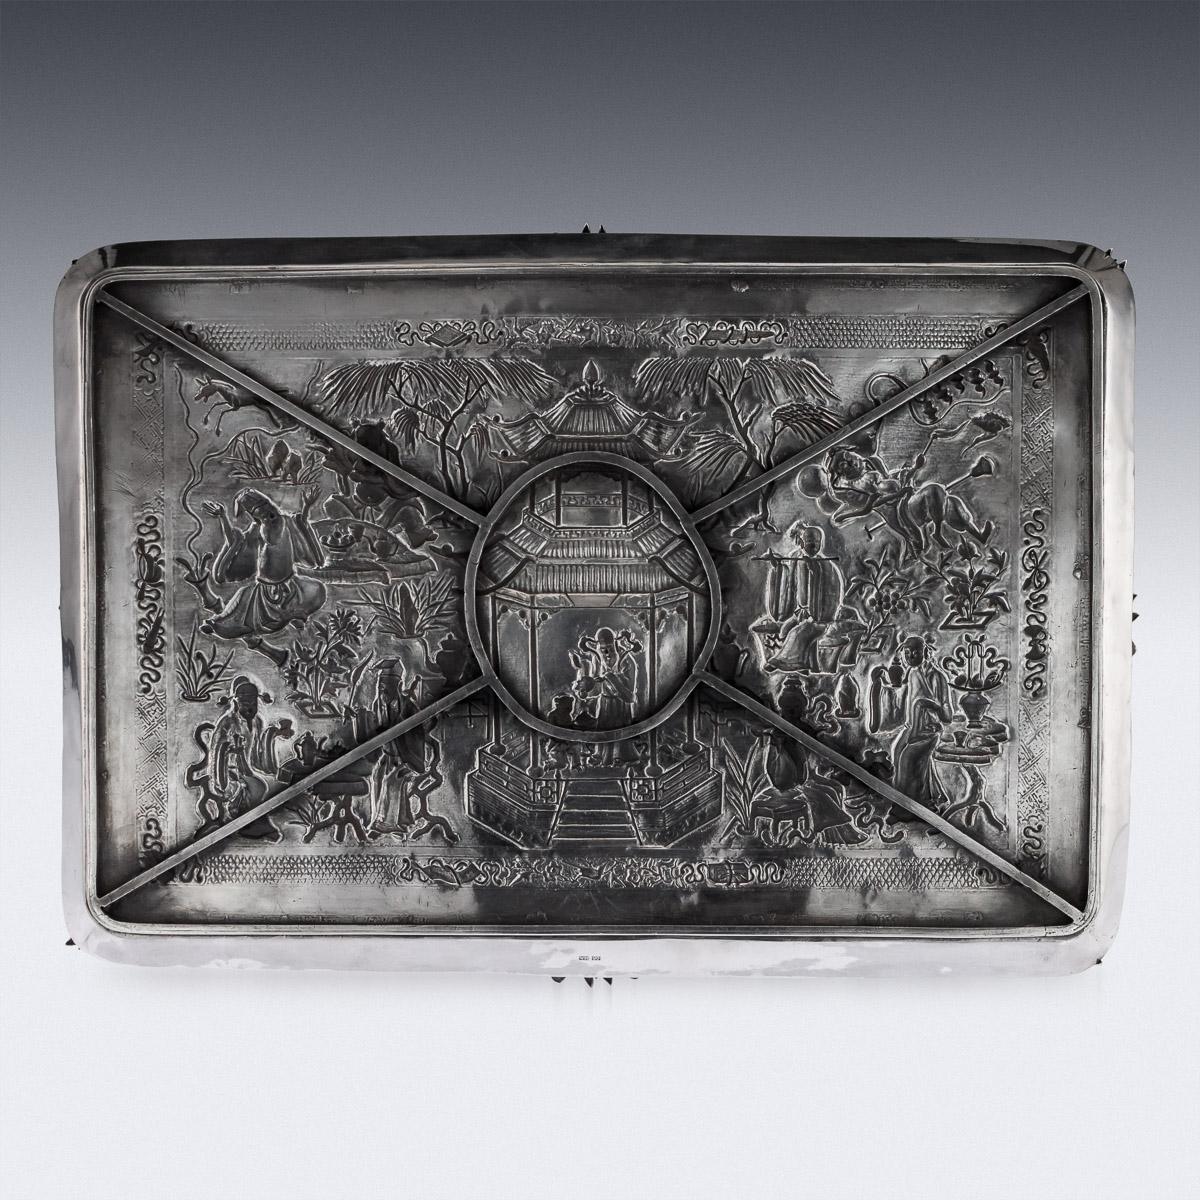 Antique 19th century Chinese exceptional solid silver cabinet / wall plaque, of large size, chased with beautifully scenes in relief depicting people of nobility enjoying activities of leisure amongst foliage, the center depicting a large pagoda,